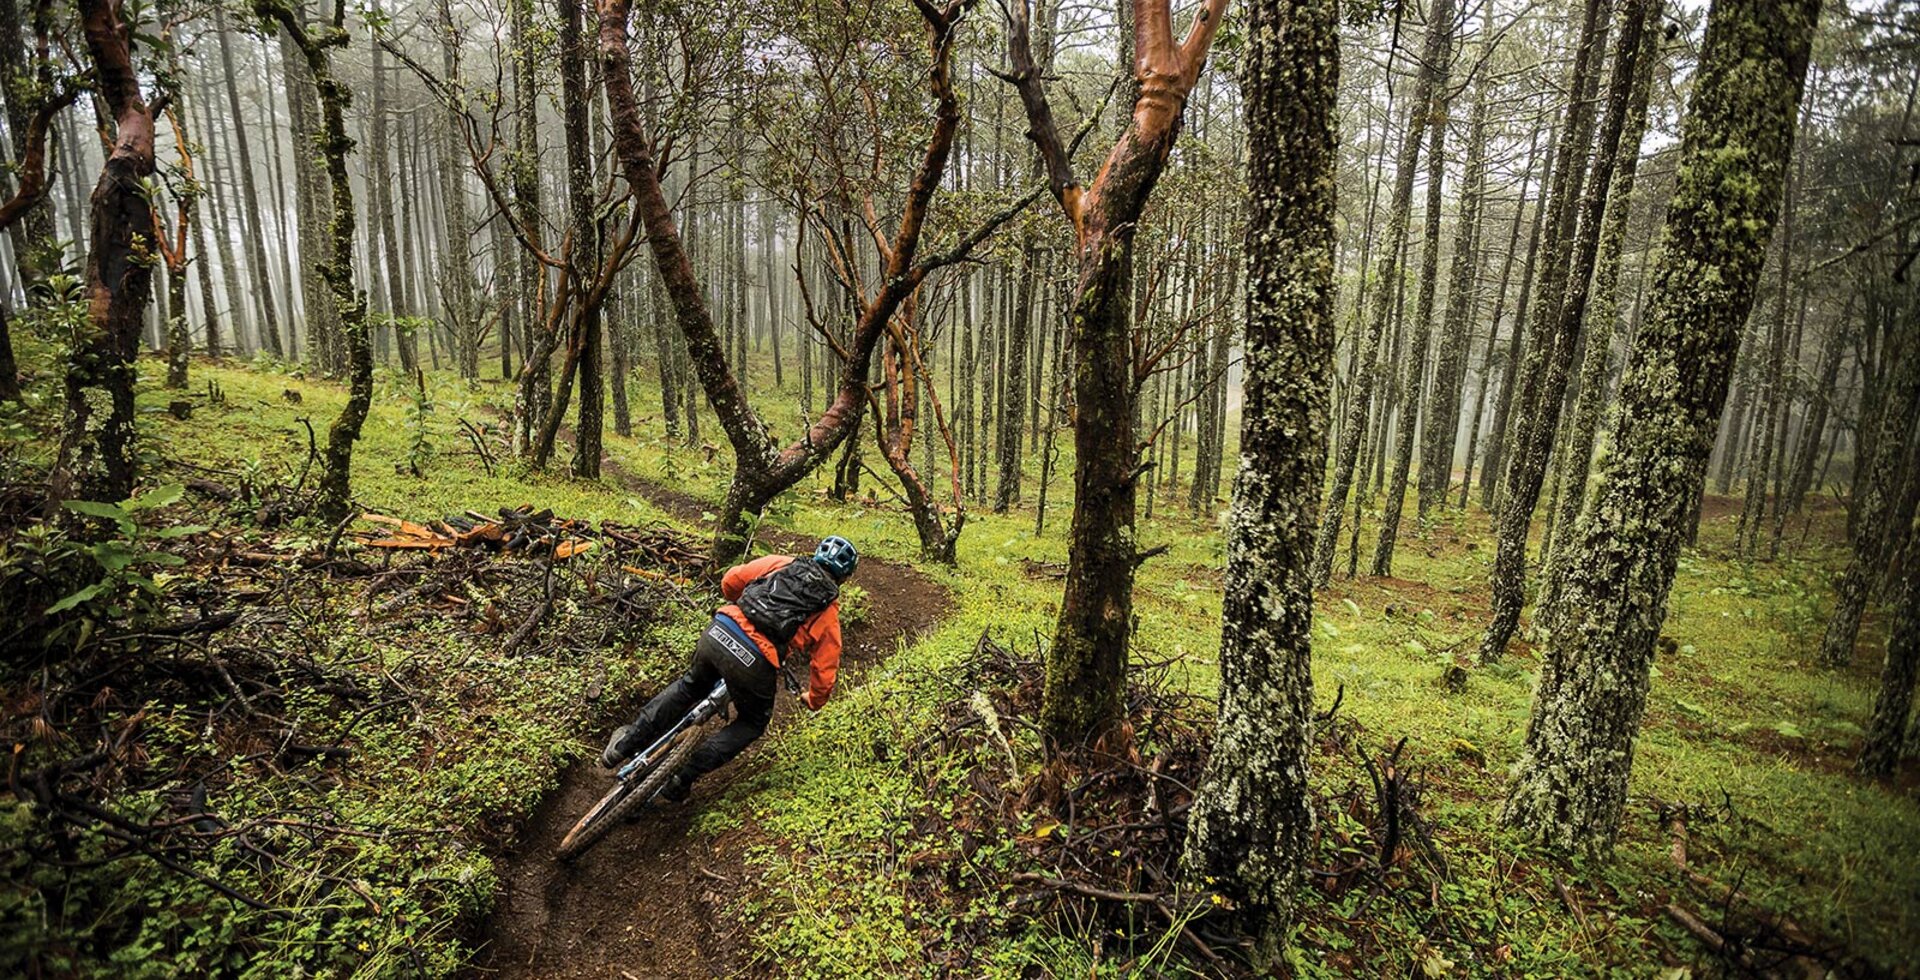 High in the cloud forest of the Sierra Juárez, Luis “Huicho” Aguilar rips down a trail named Jabalí (Wild Boar)—one of many divine ribbons of singletrack in the sprawling network of Santa Catarina Ixtepeji. These paths have long been a lifeline for the region’s inhabitants, who use them to harvest resin from the trees and collect firewood (such as that piled alongside the trail).